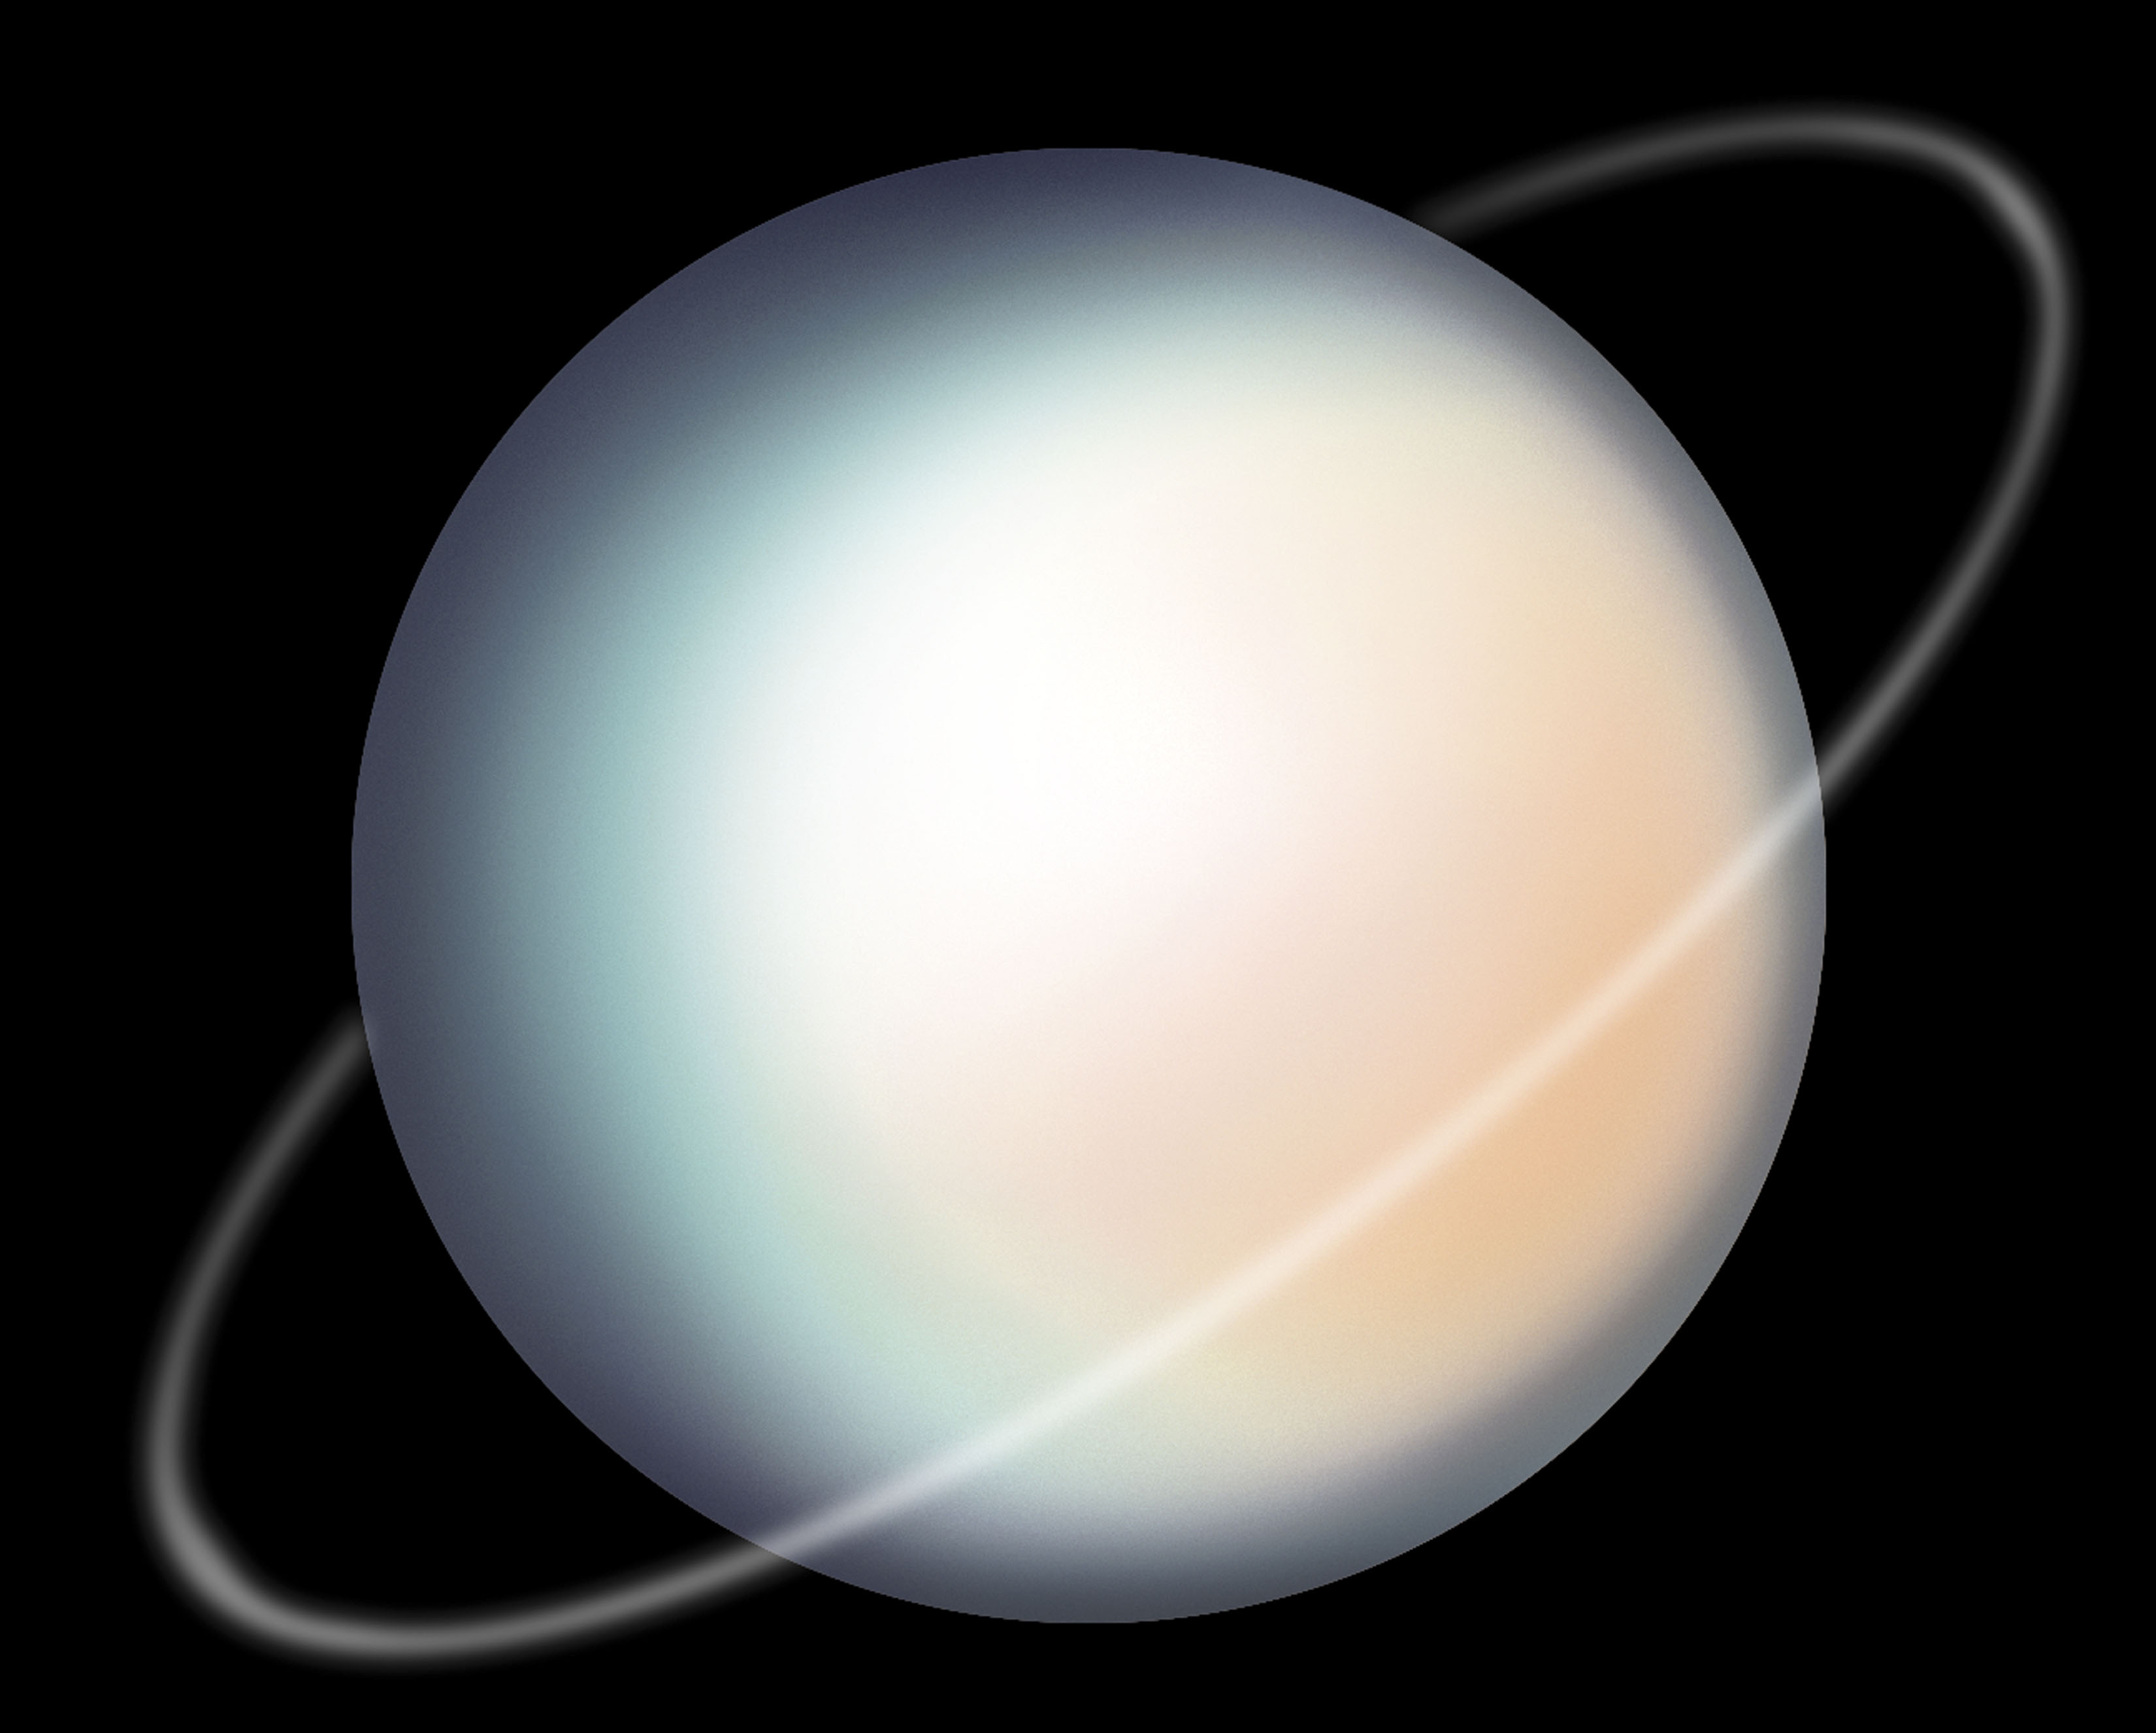 Uranus will be visible to the naked eye tonight across 